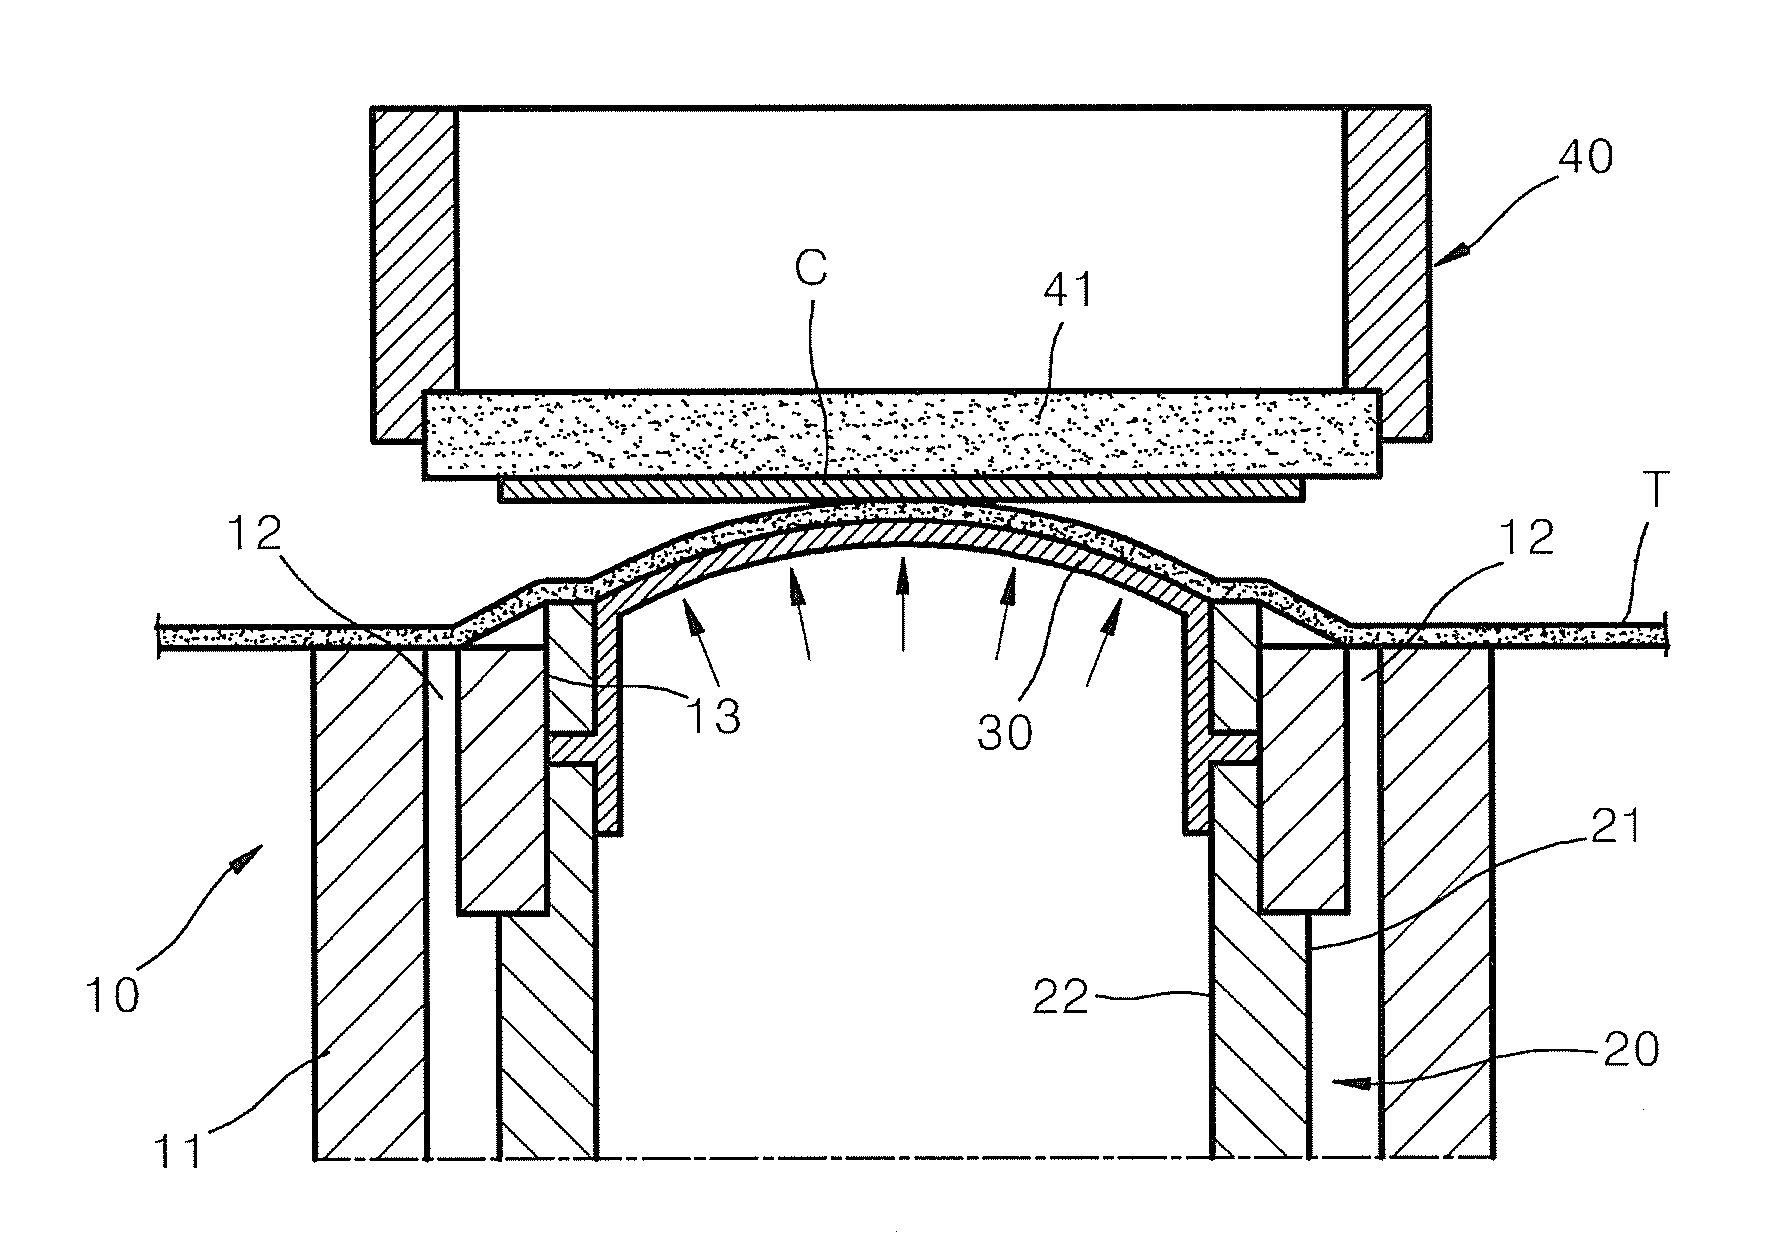 Apparatus and method for detaching chip